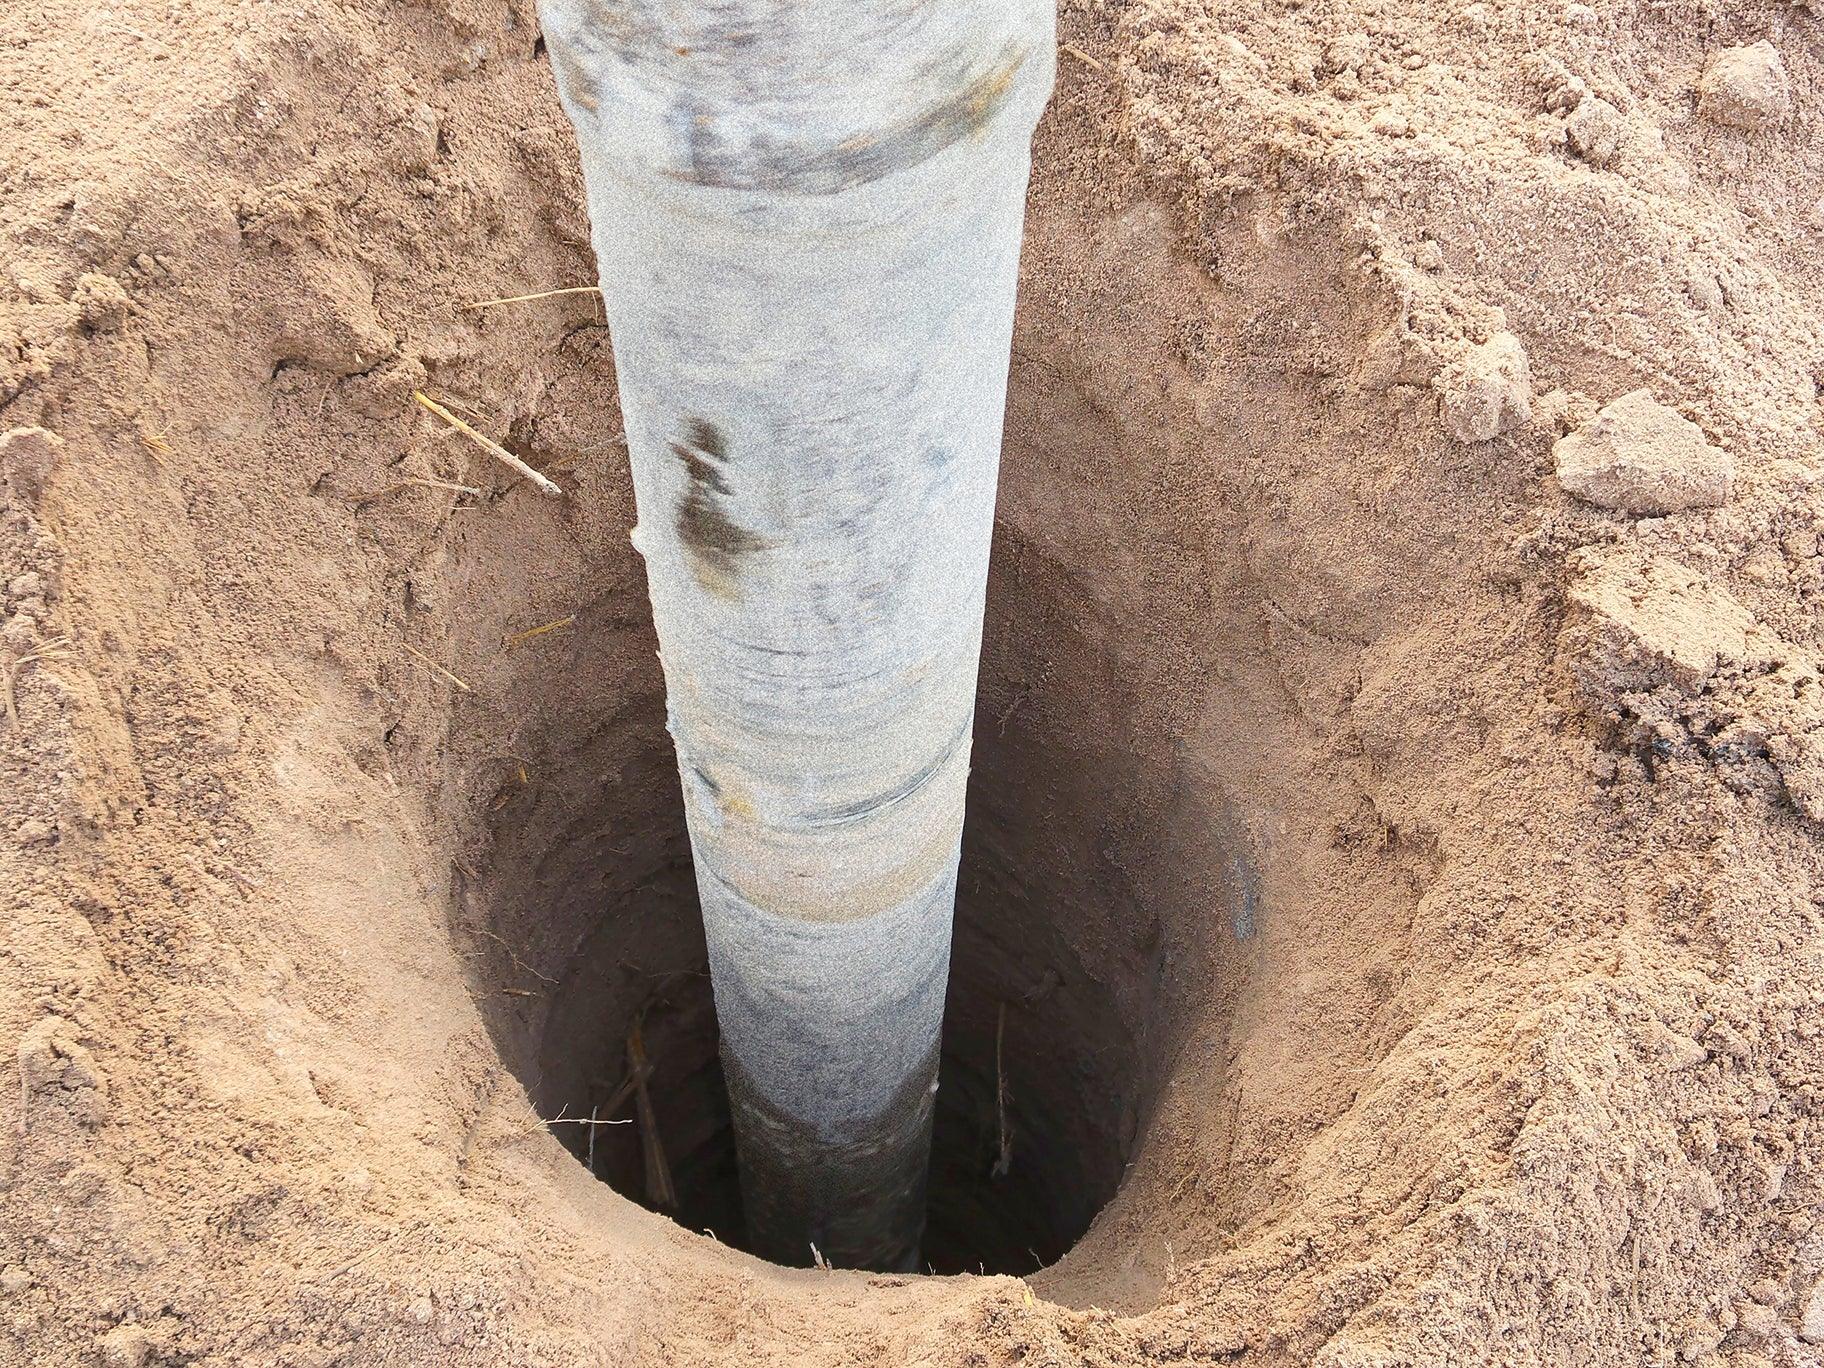 A close-up image of a metal pole partially buried in a hole dug in dry soil. The surrounding ground has an uneven, rough texture with some scattered small rocks and debris. The pole is upright with visible dirt and scratches on its surface, showcasing the effect of compressive strength on durable structures built with Brisks High Performance Concrete.